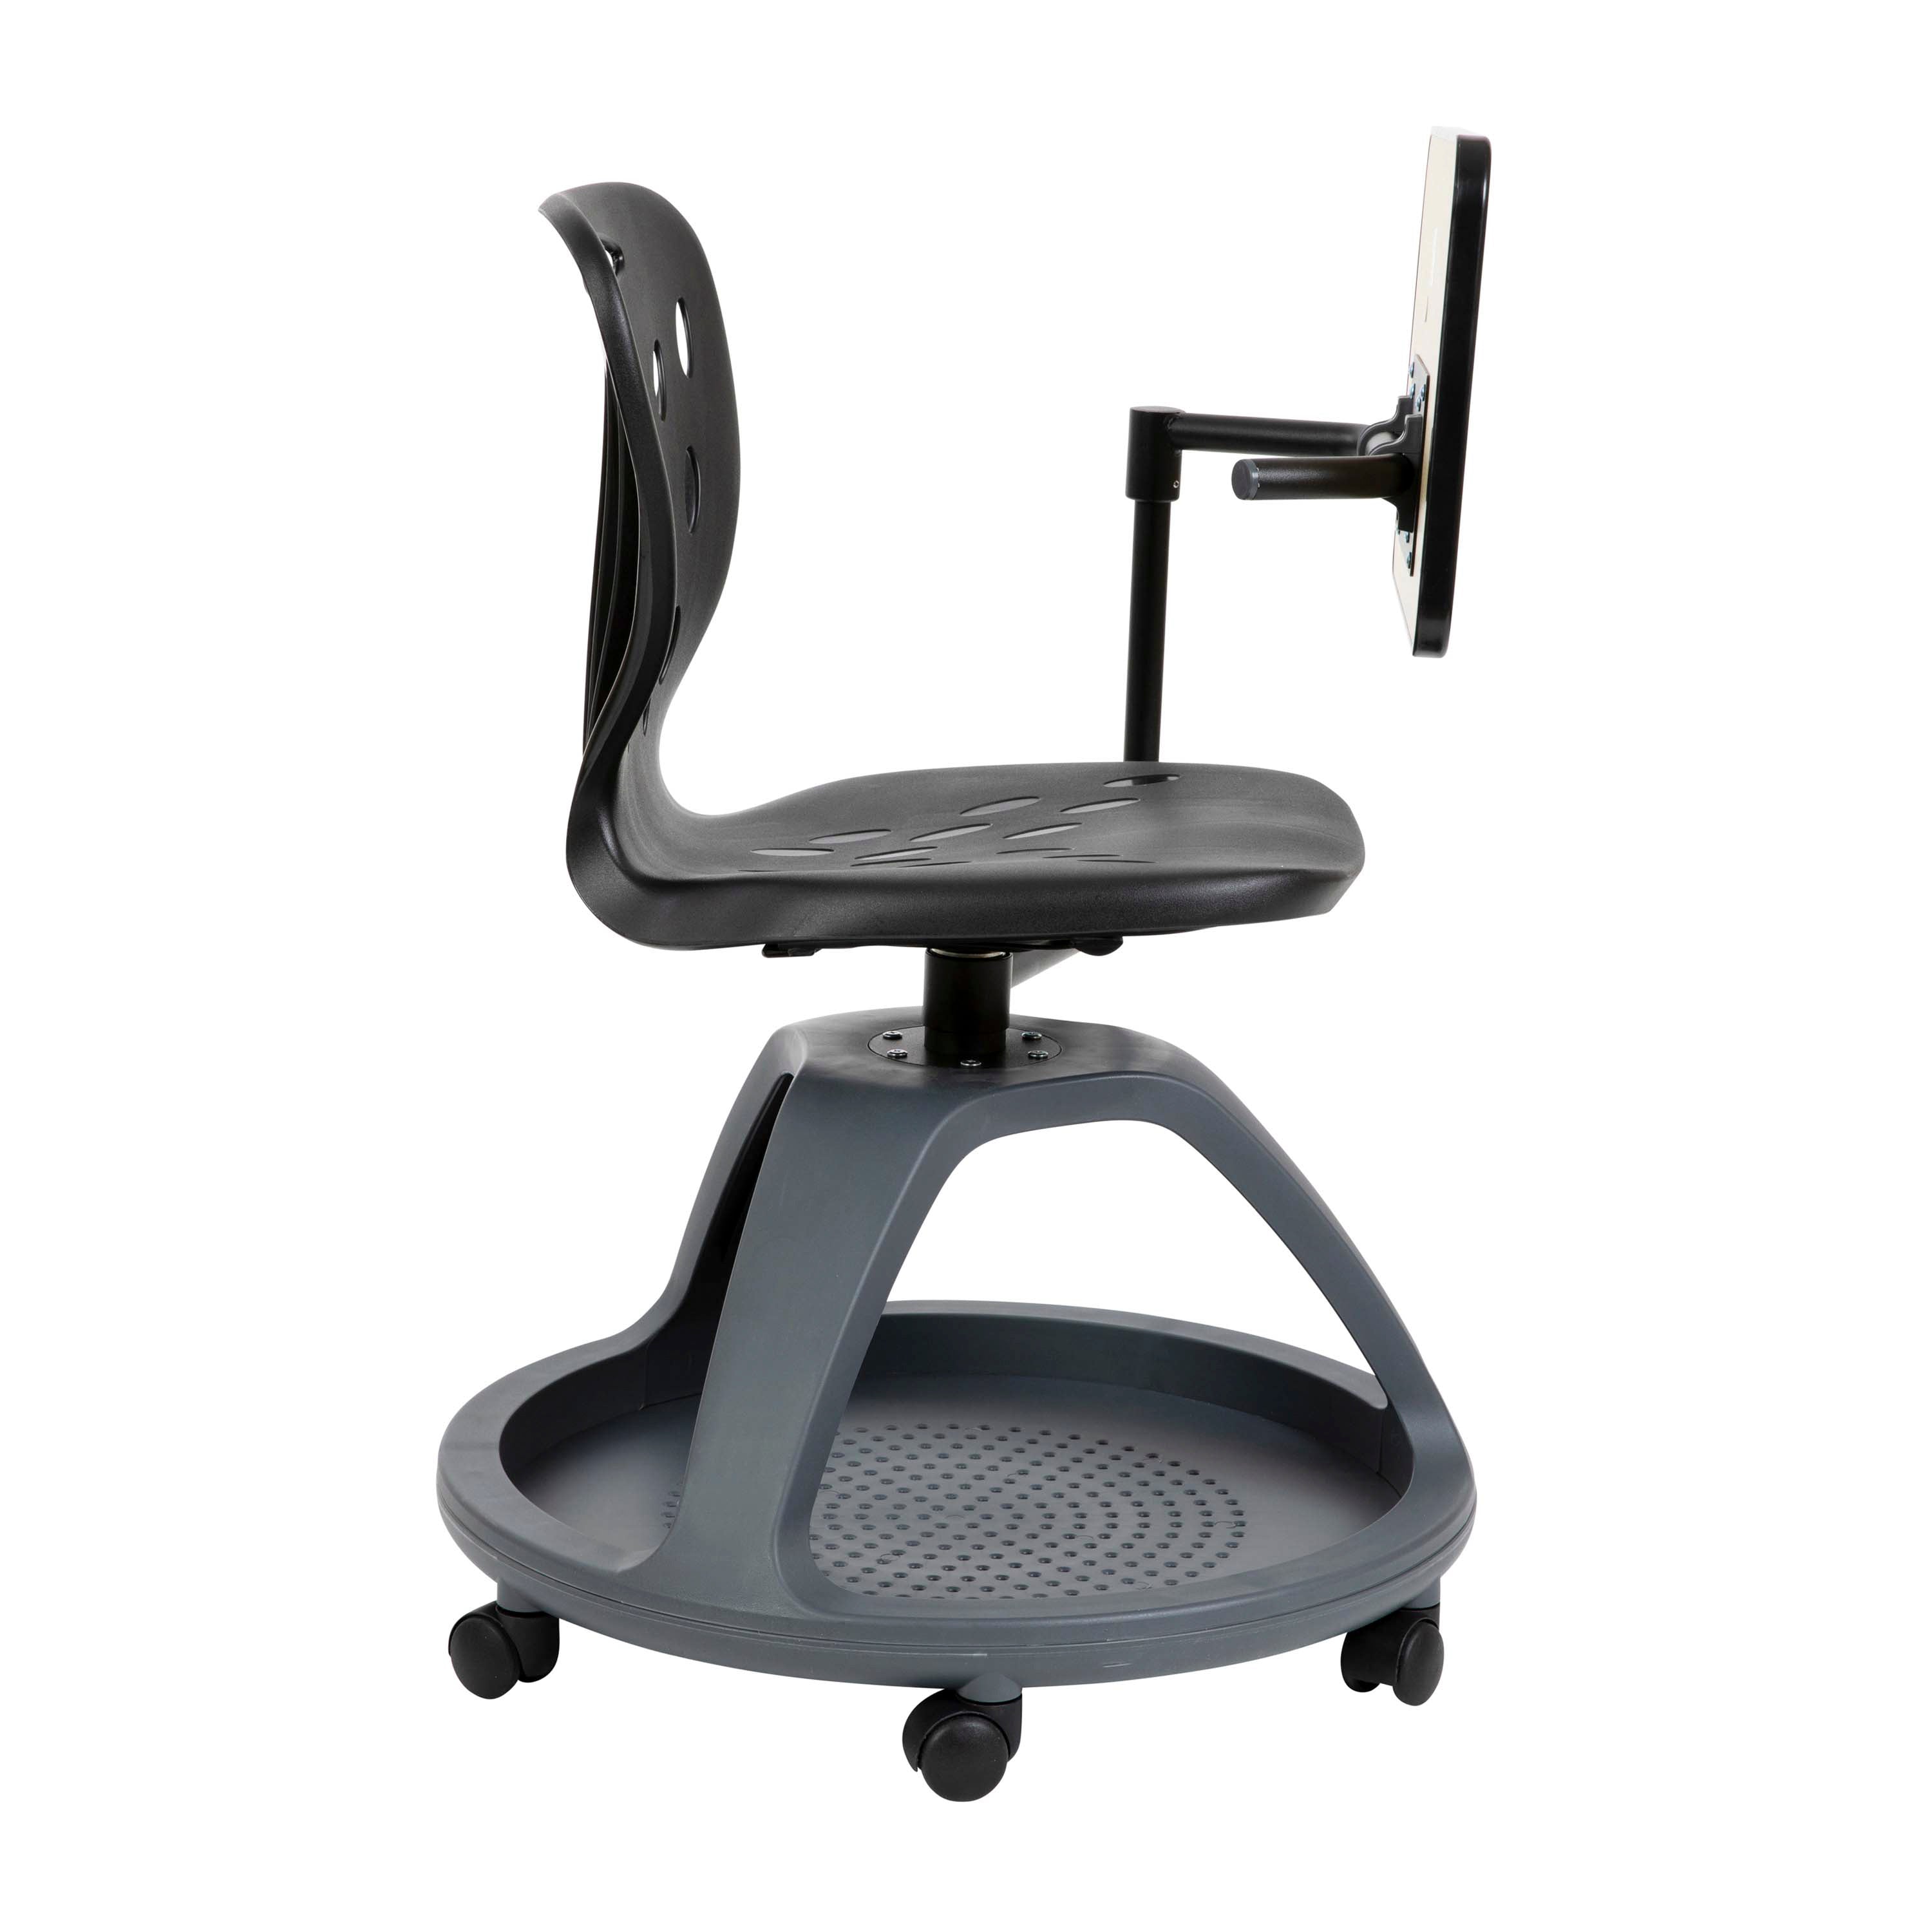 Mobile Desk Chair with 360 Degree Tablet Rotation and Under Seat Storage Cubby-Mobile Desk Chair-Flash Furniture-Wall2Wall Furnishings